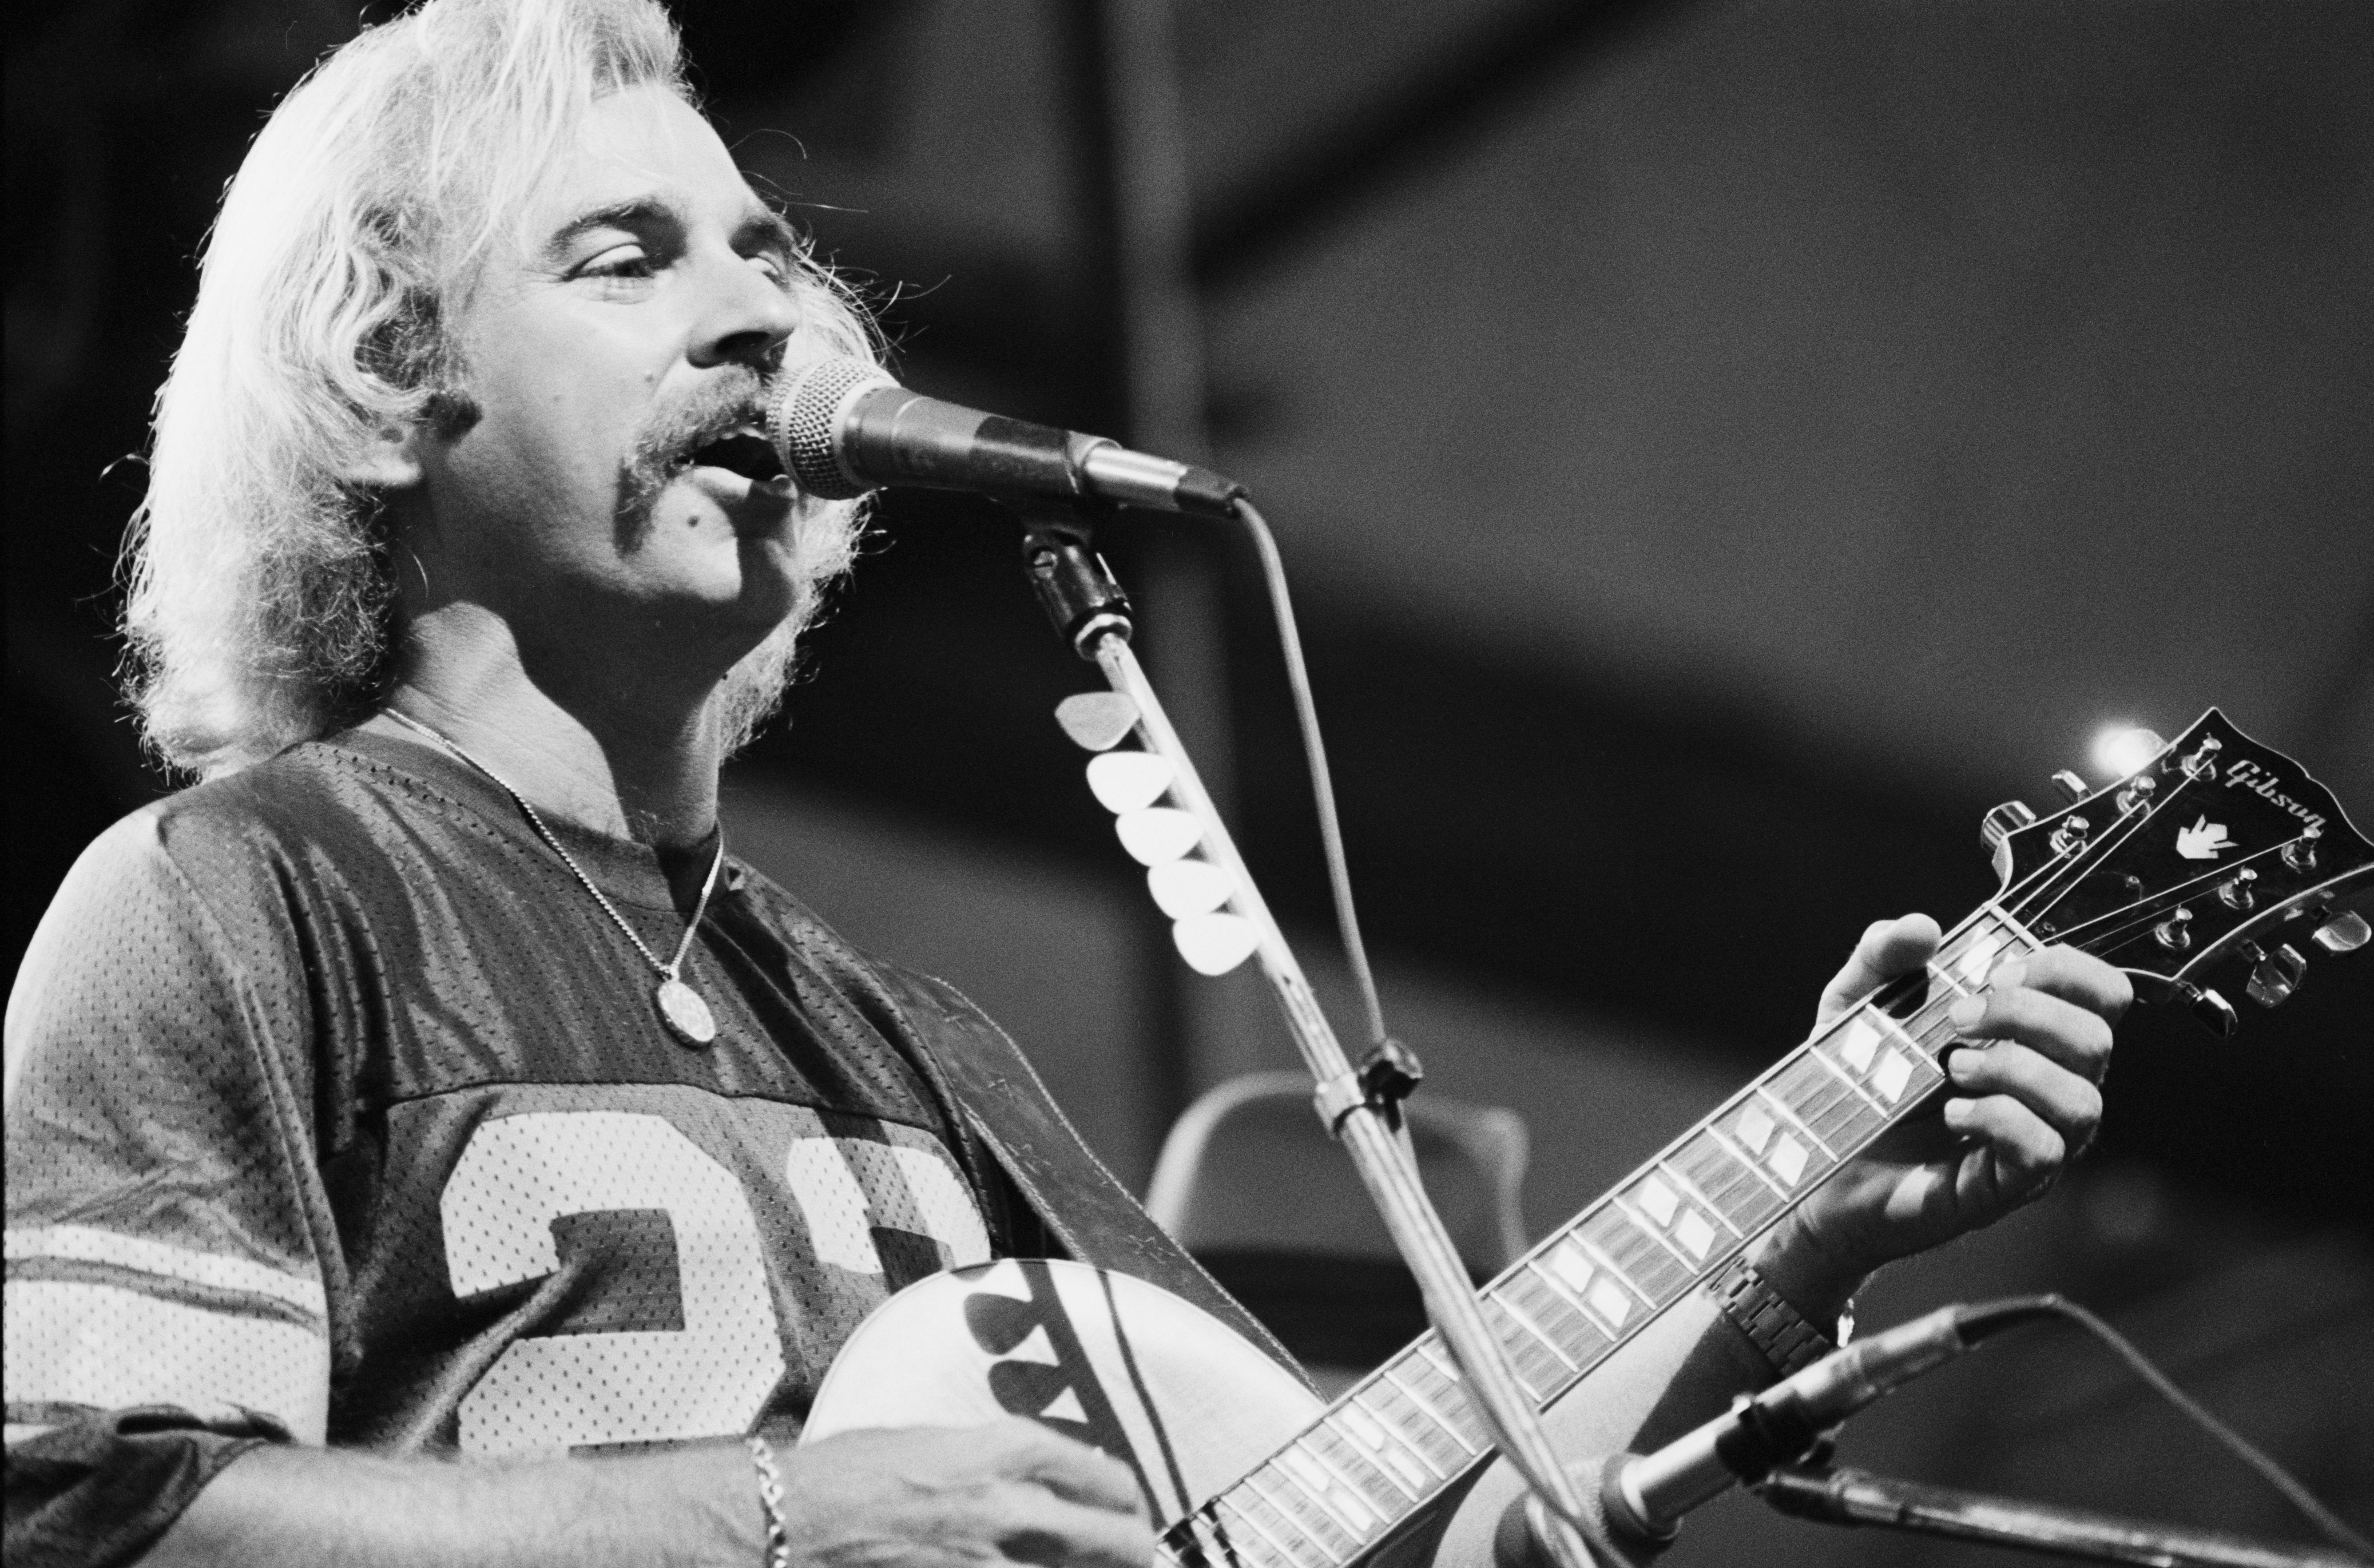 jimmy buffett onstage in the 70s in black and white